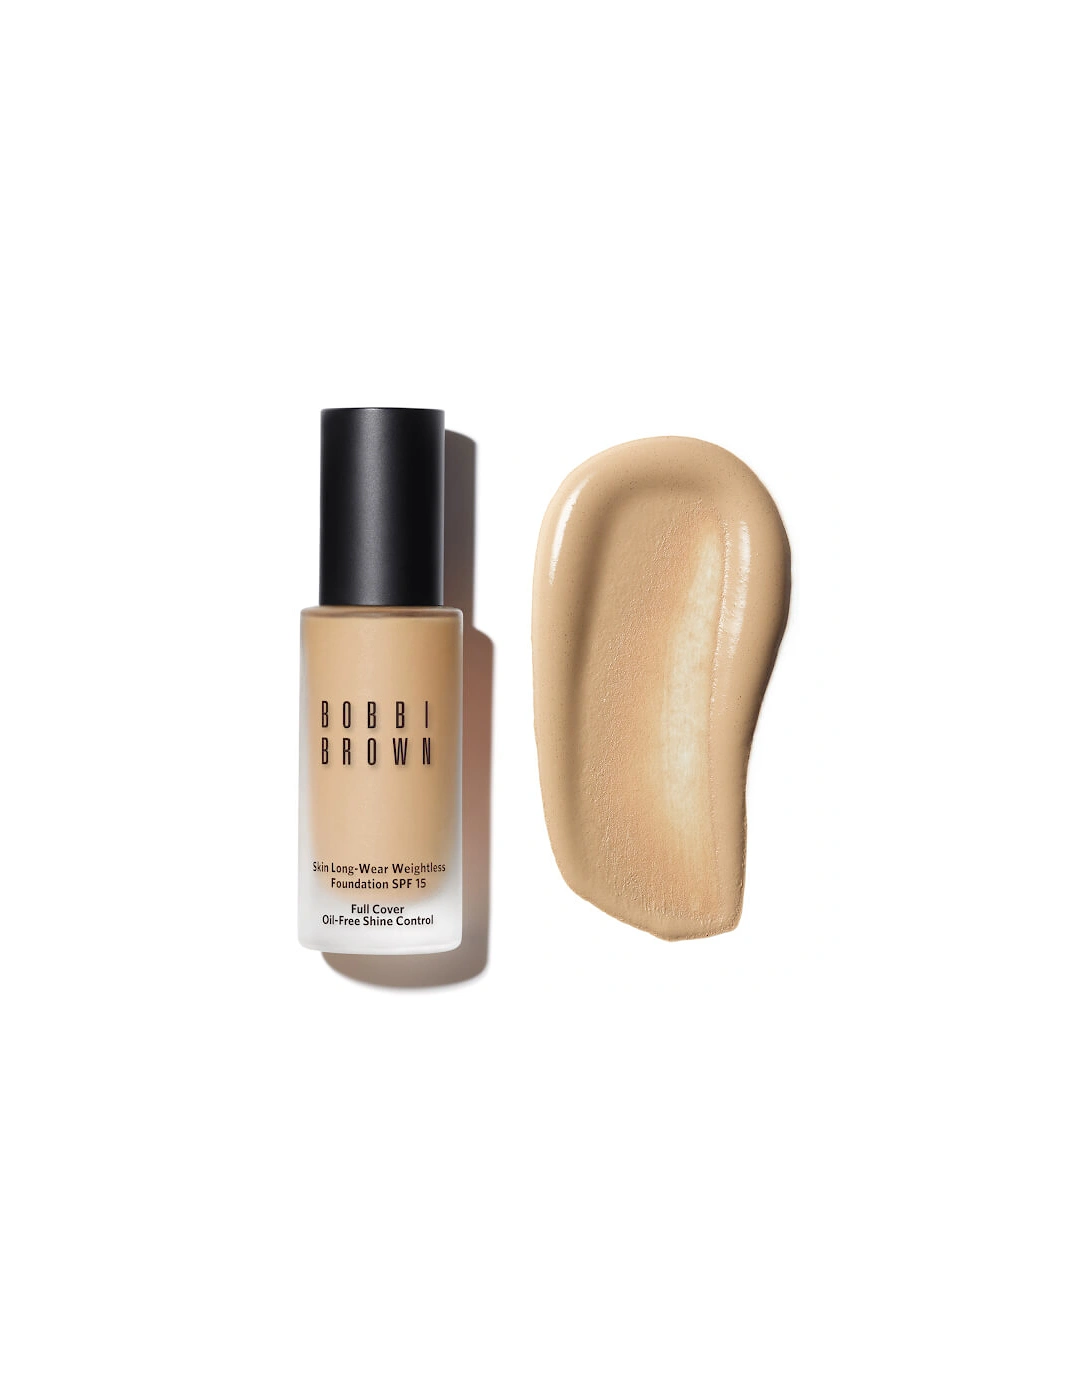 Skin Long-Wear Weightless Foundation SPF15 - Cool Ivory, 2 of 1